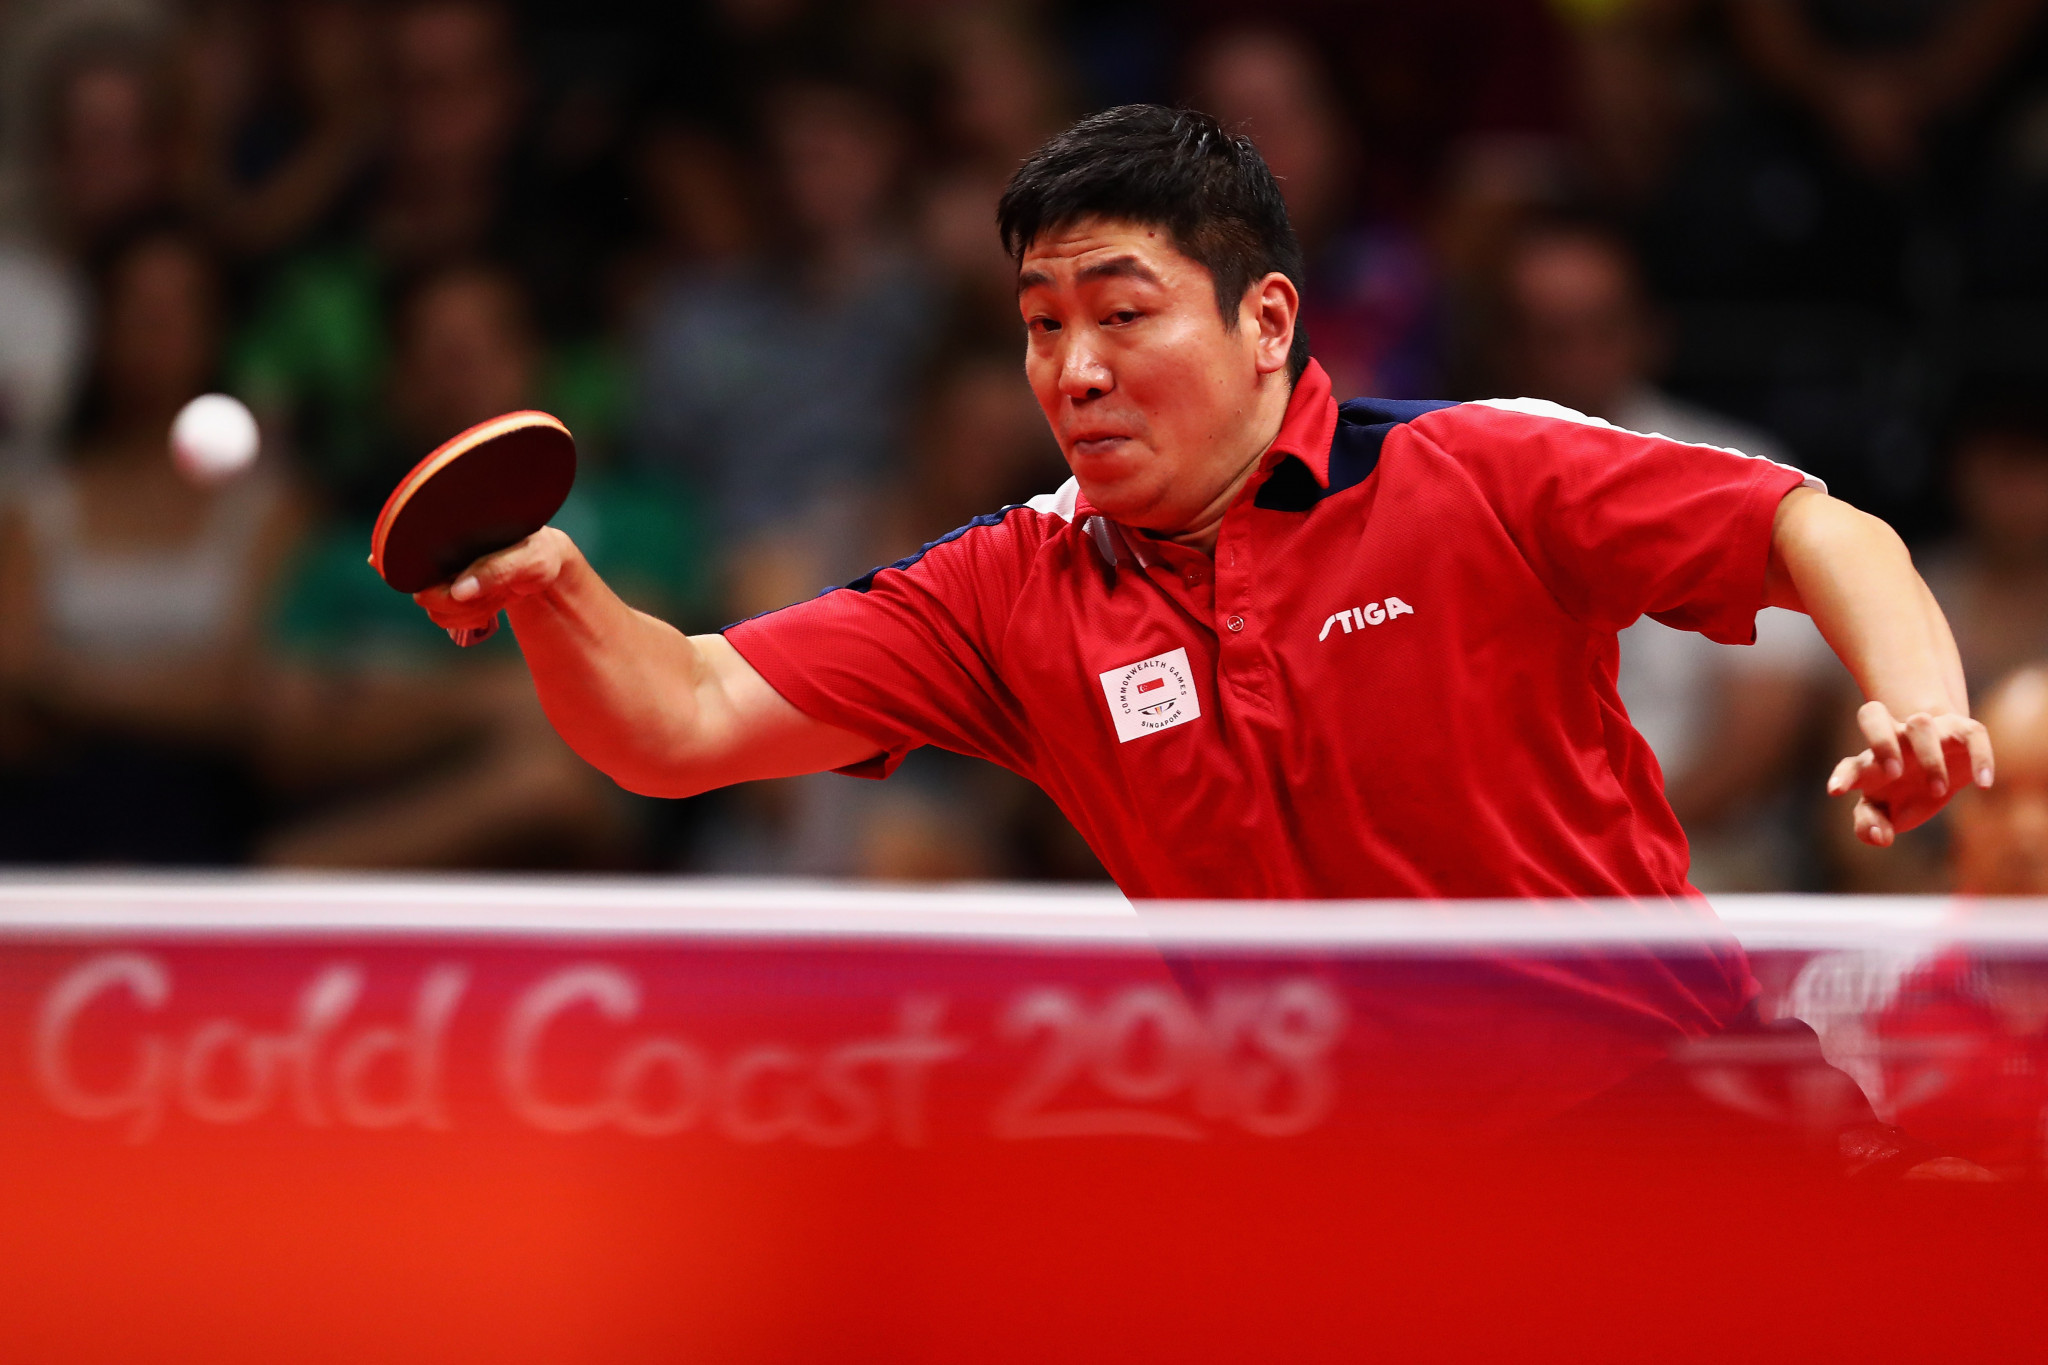 Gao secures elusive singles gold and mixed doubles title on final day of table tennis at Gold Coast 2018